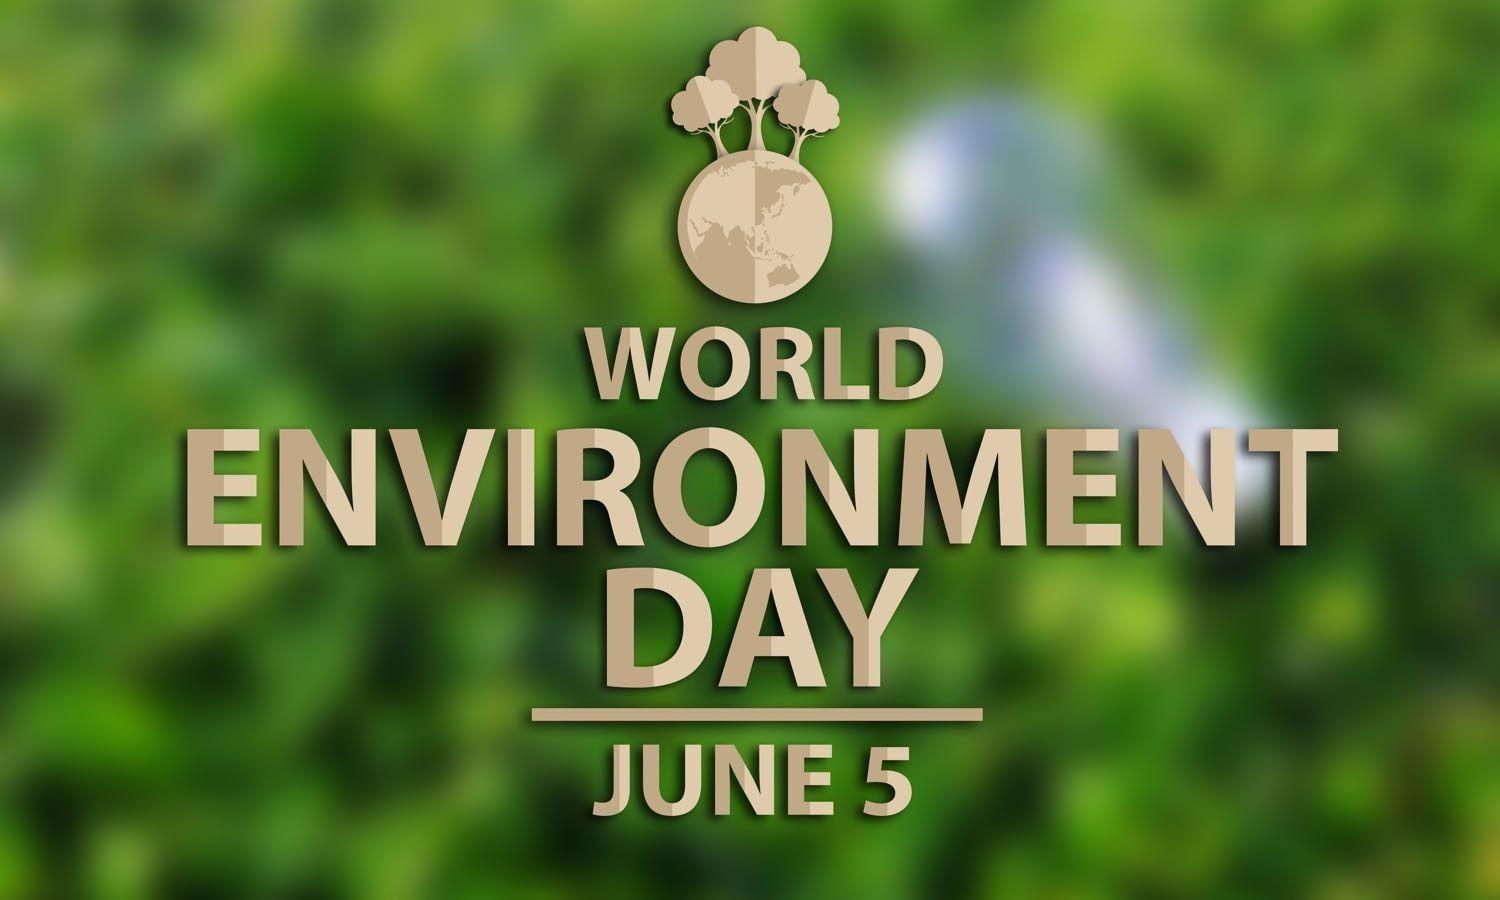 World Environment Day Image, Picture, Photo, Wallpaper